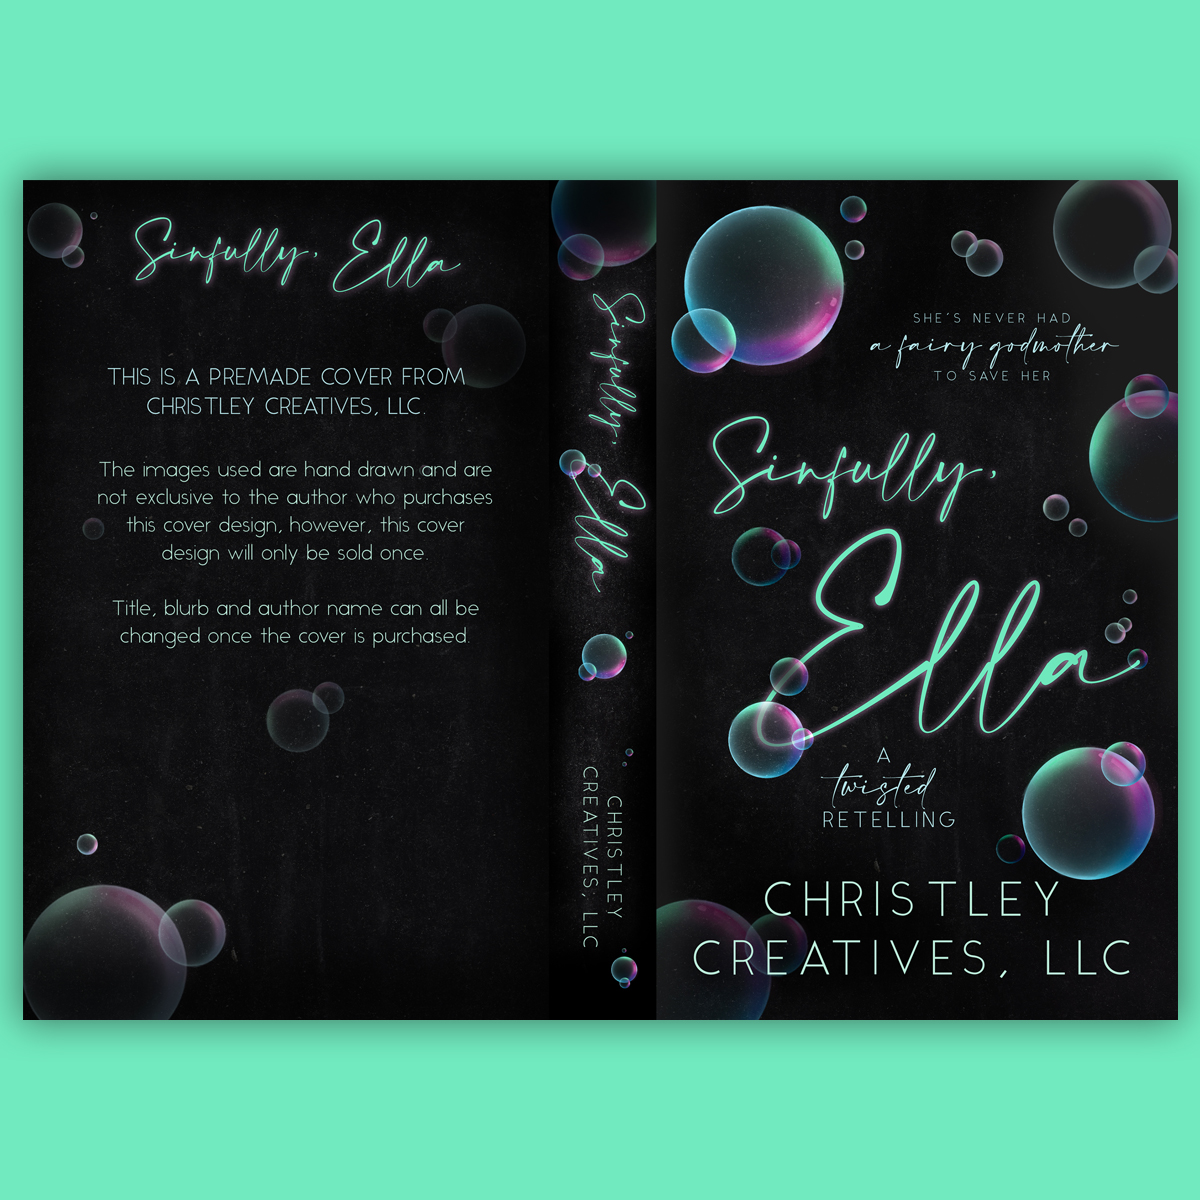 Sinfully, Ella - Premade Contemporary Romance Fairytale Retelling Book Cover from Christley Creatives